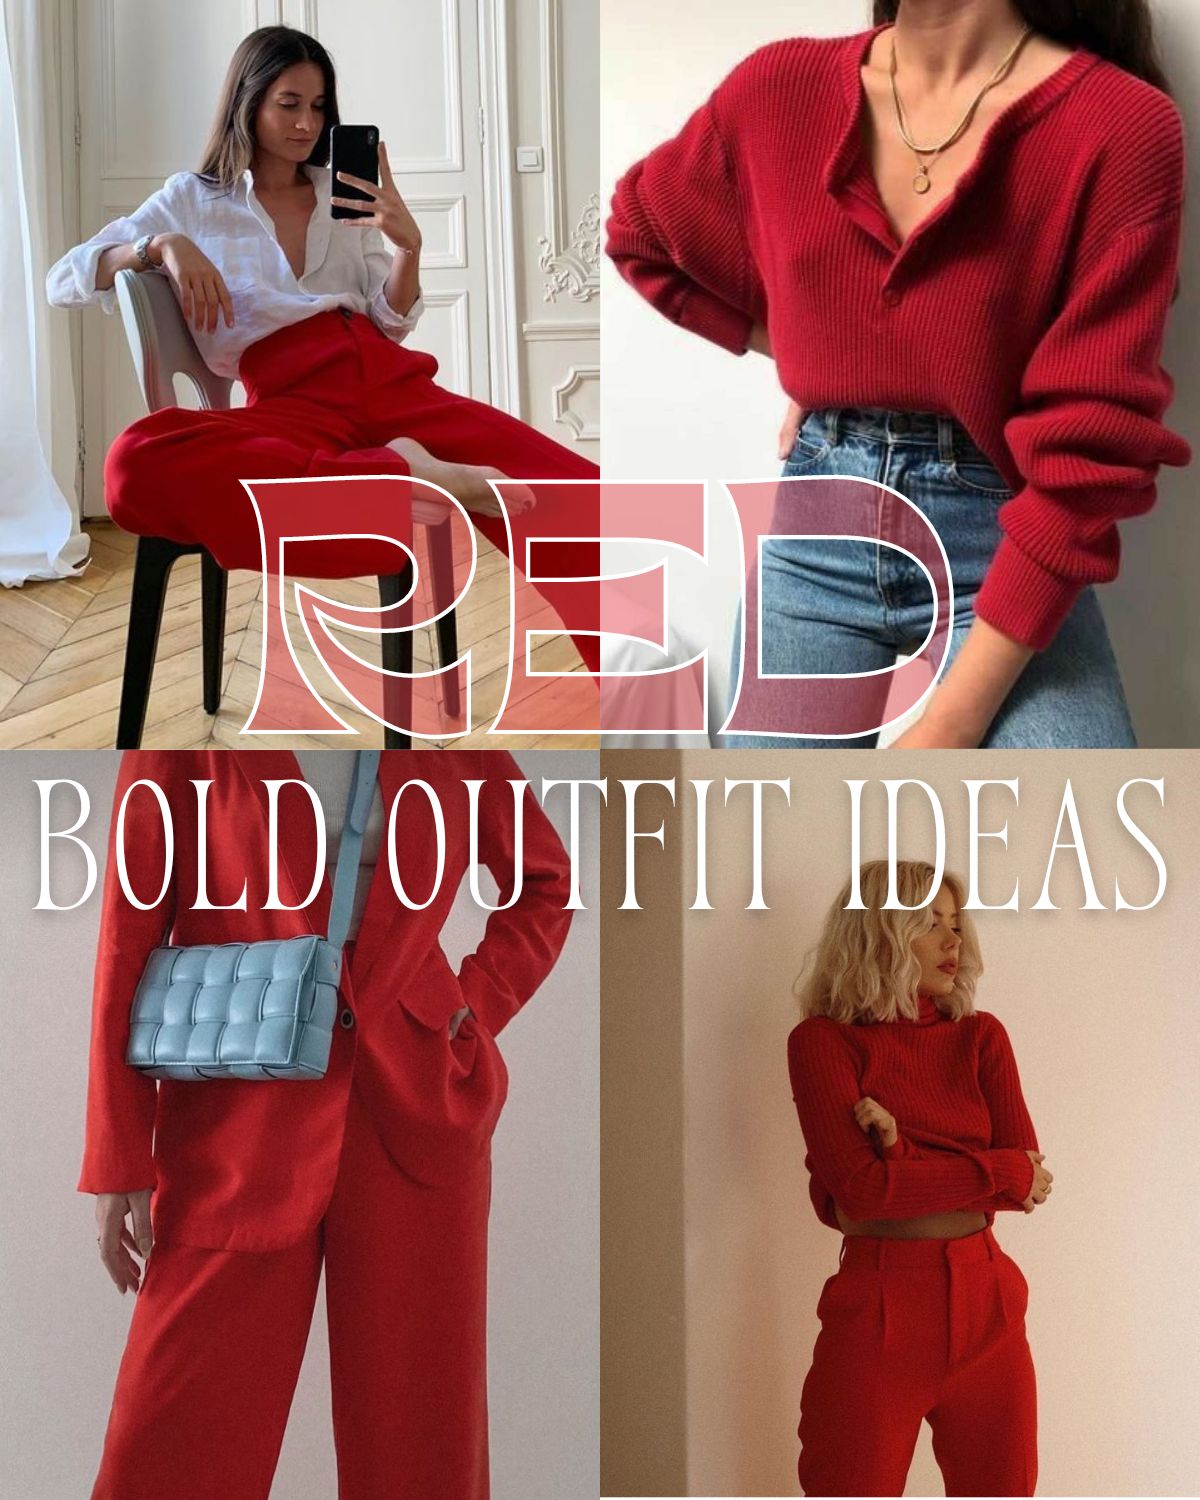 Four outfits that are red